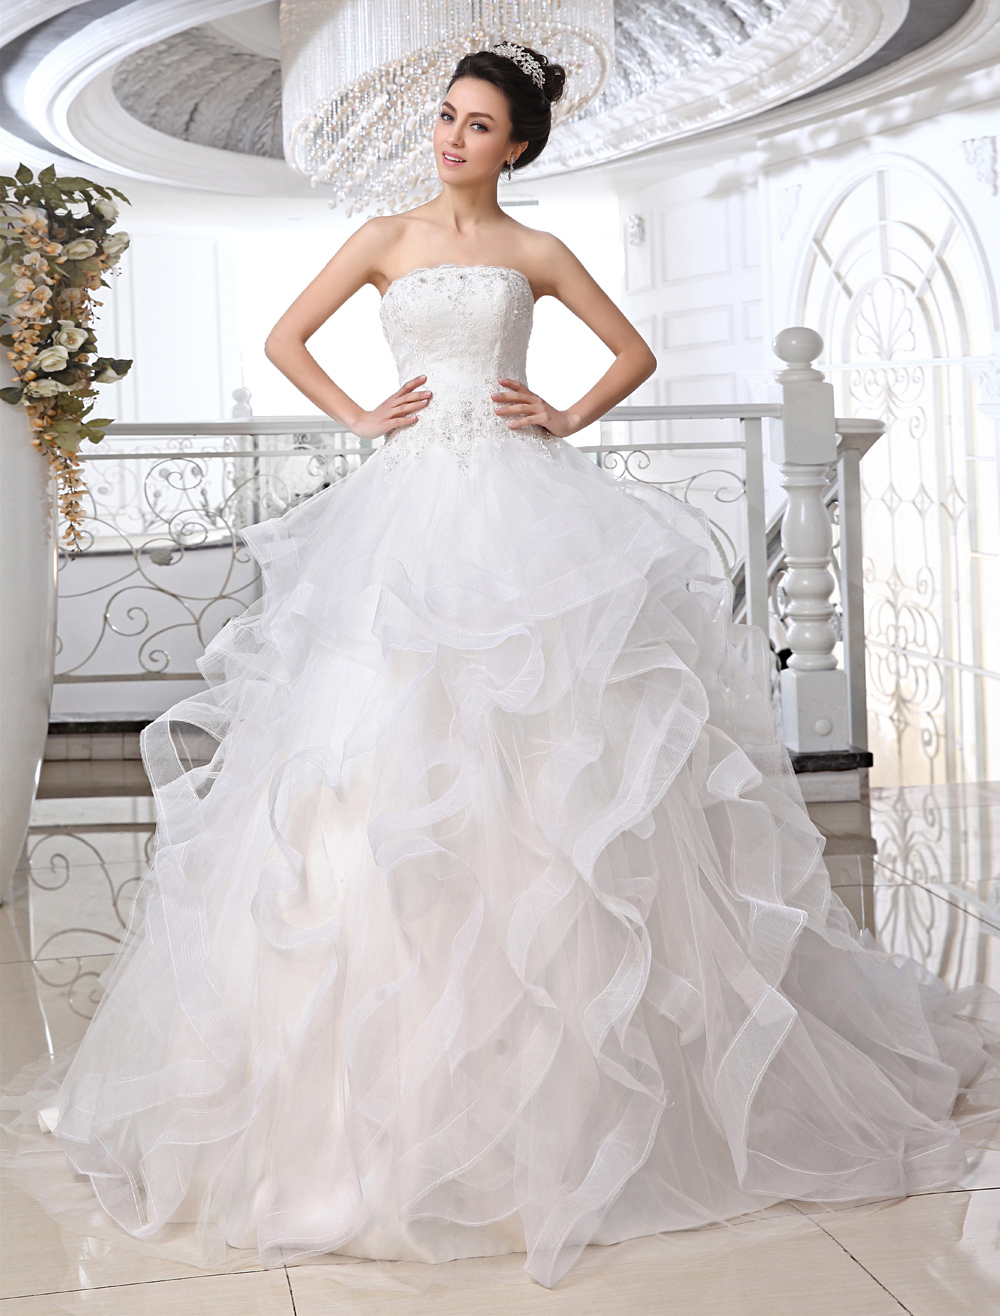 Ivory A-line Strapless Lace Court Train Wedding Dress For Bride ...